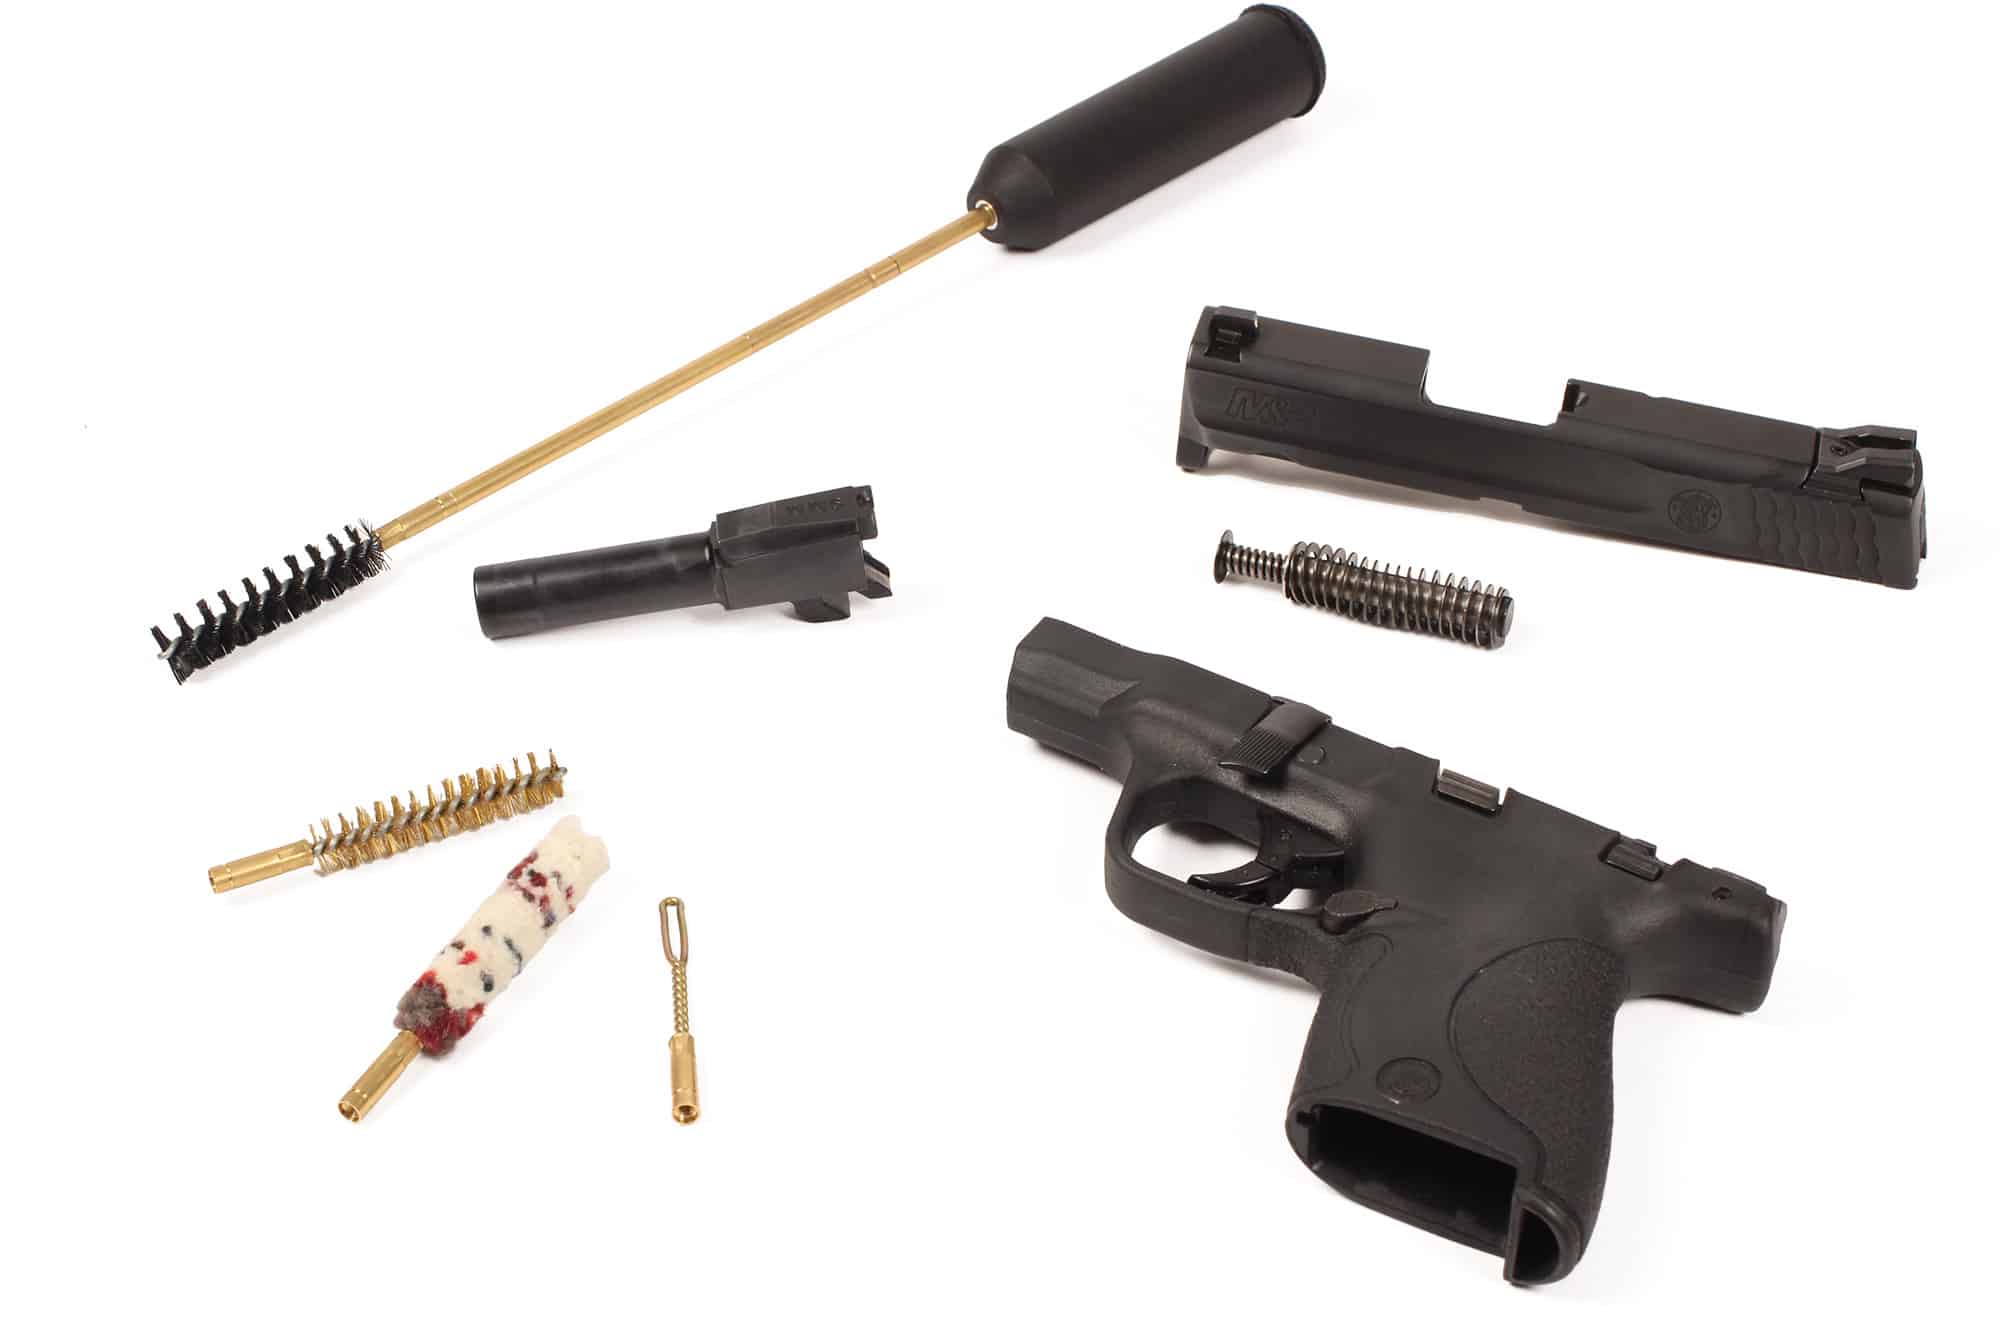 Compact Pistol Cleaning Kit - 9mm or .38 Caliber